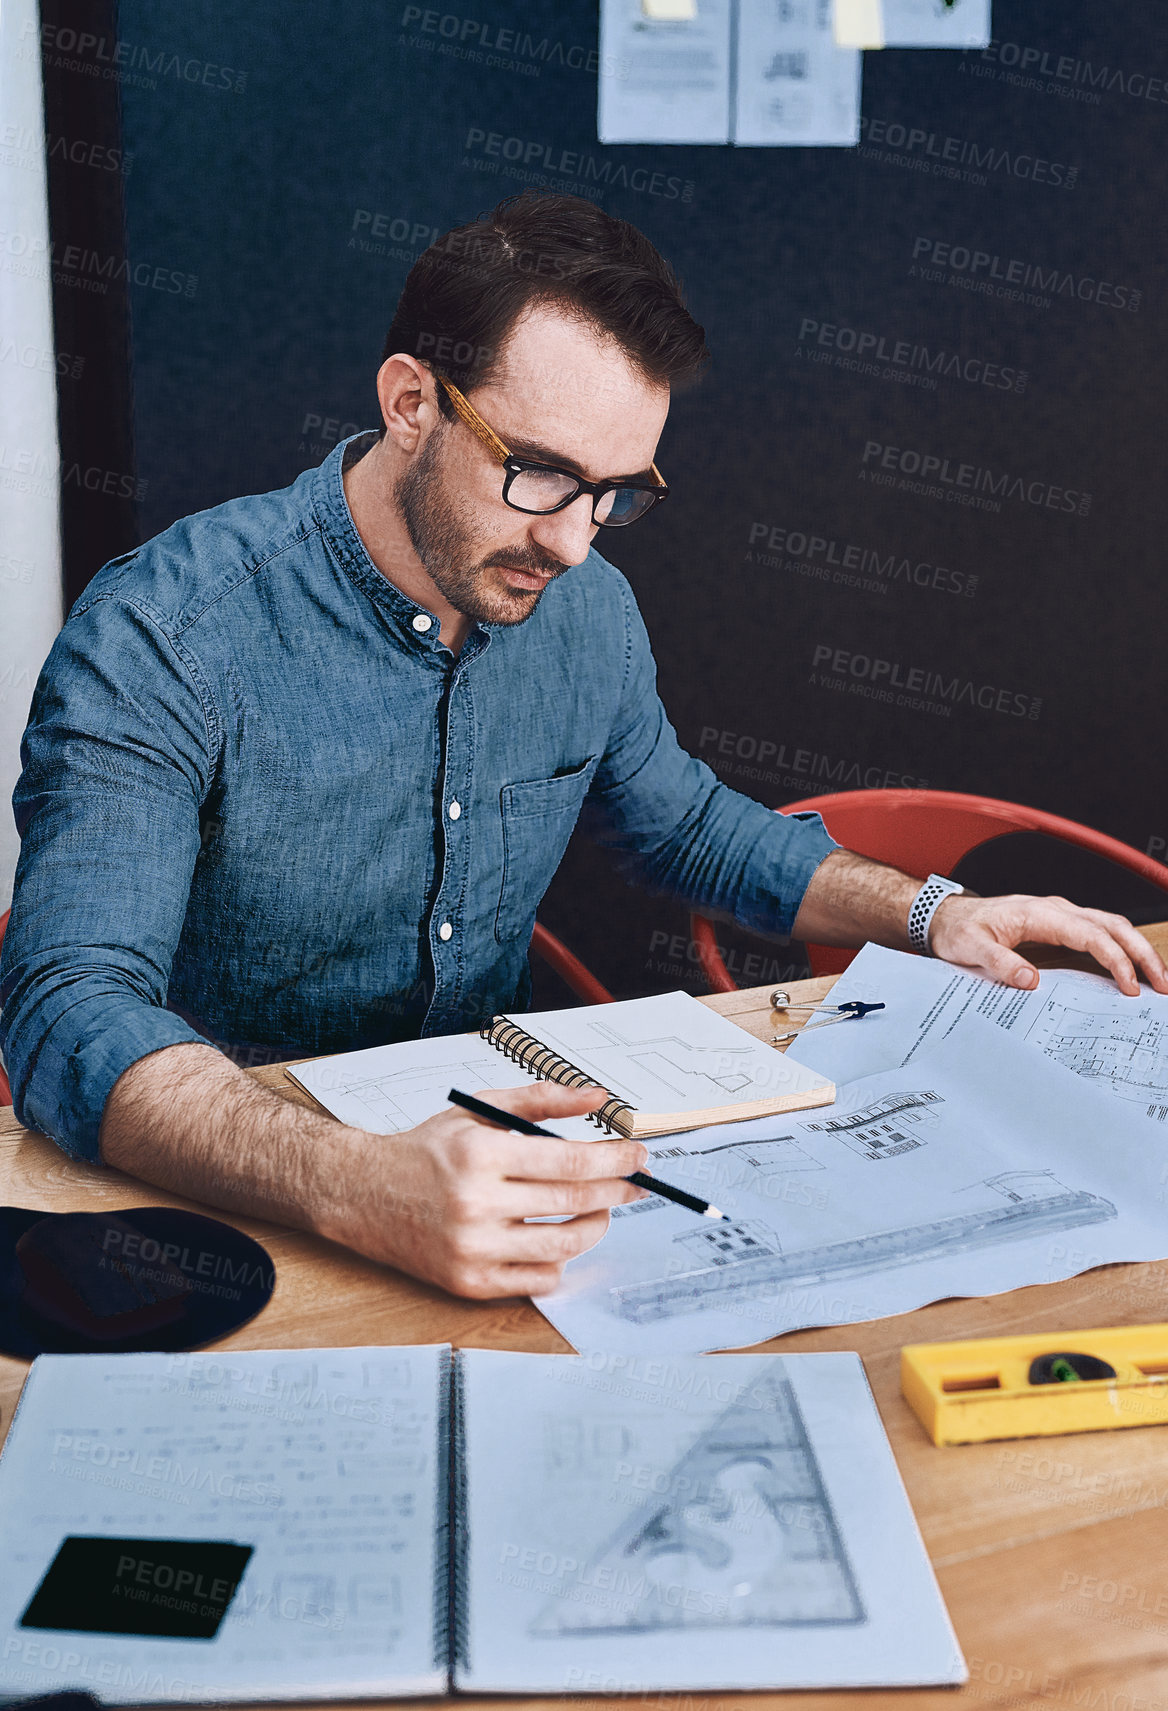 Buy stock photo Cropped shot of a handsome young male architect working with blueprints in a modern office